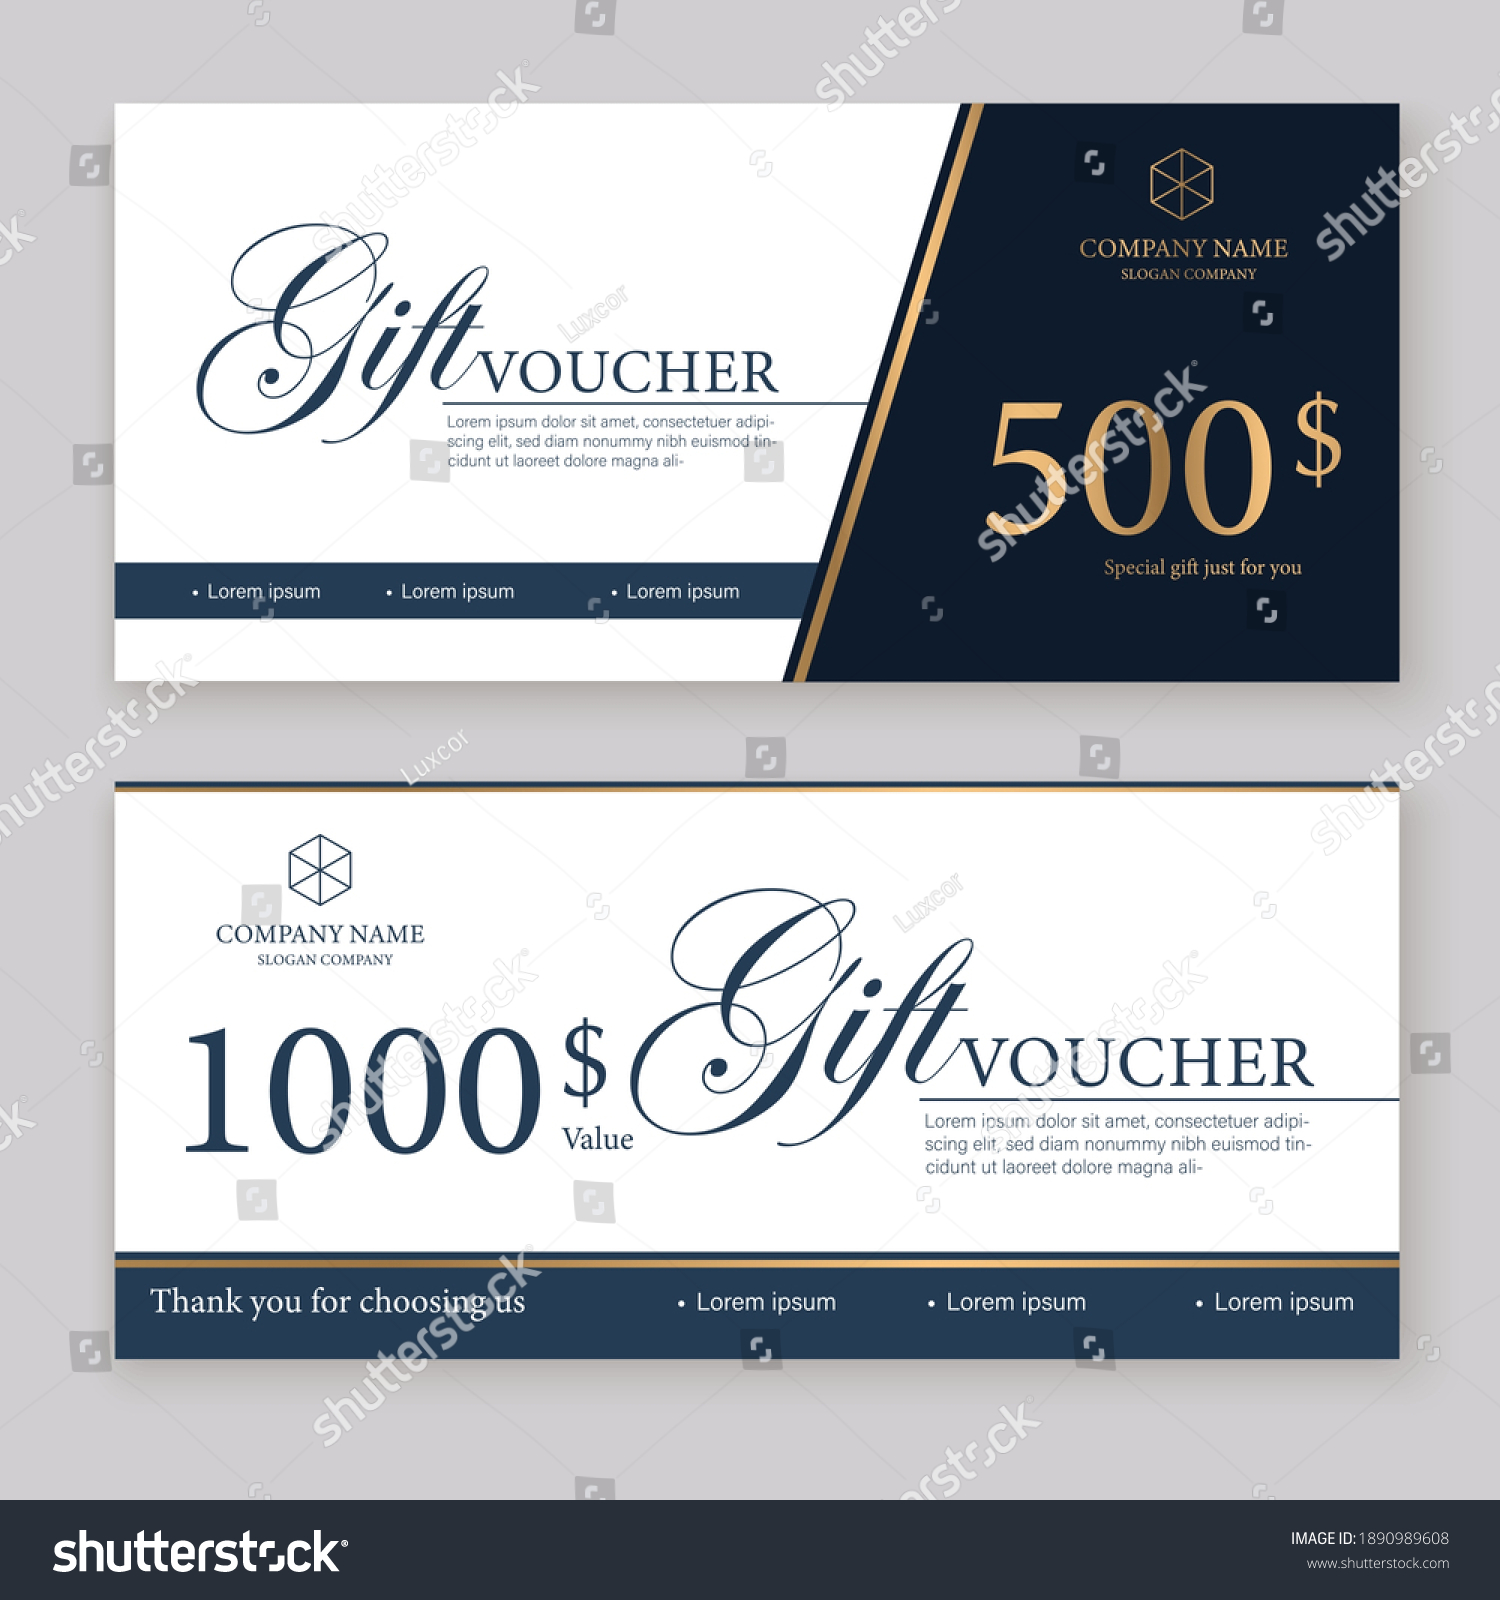 Gift Voucher Template Promotion Sale discount, black and white background #1890989608